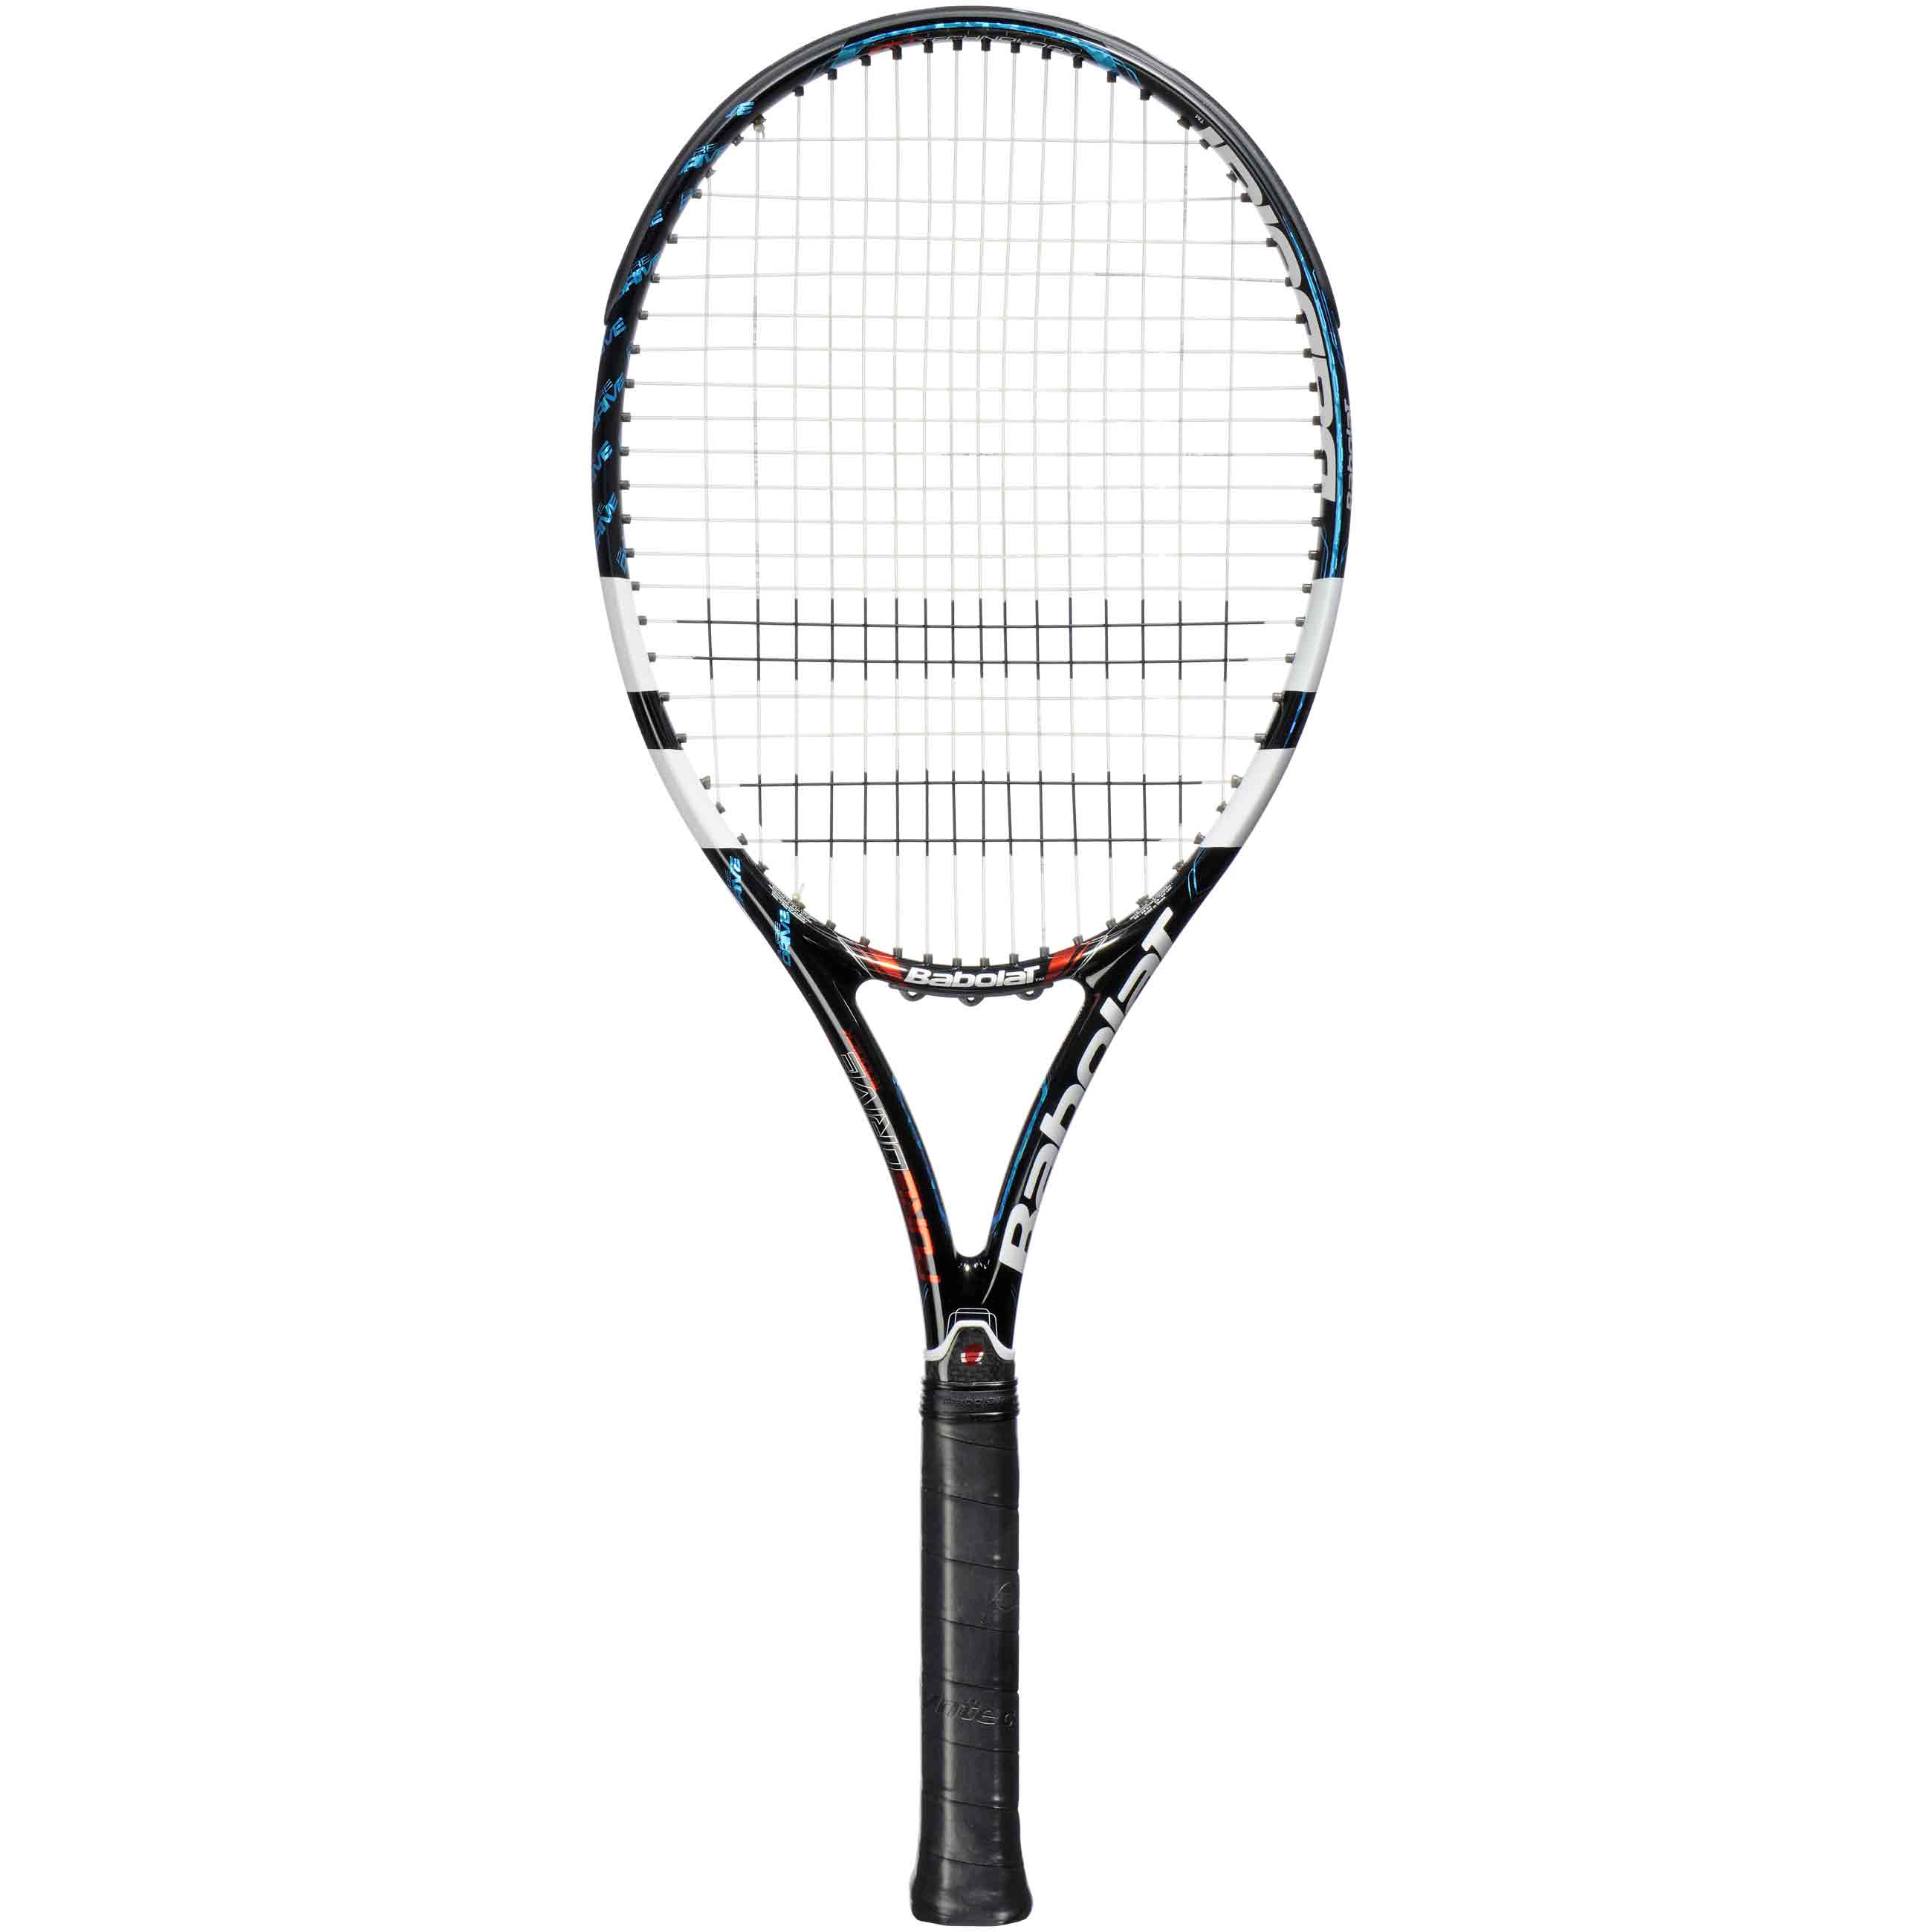 Pictures Of Tennis Rackets - ClipArt Best